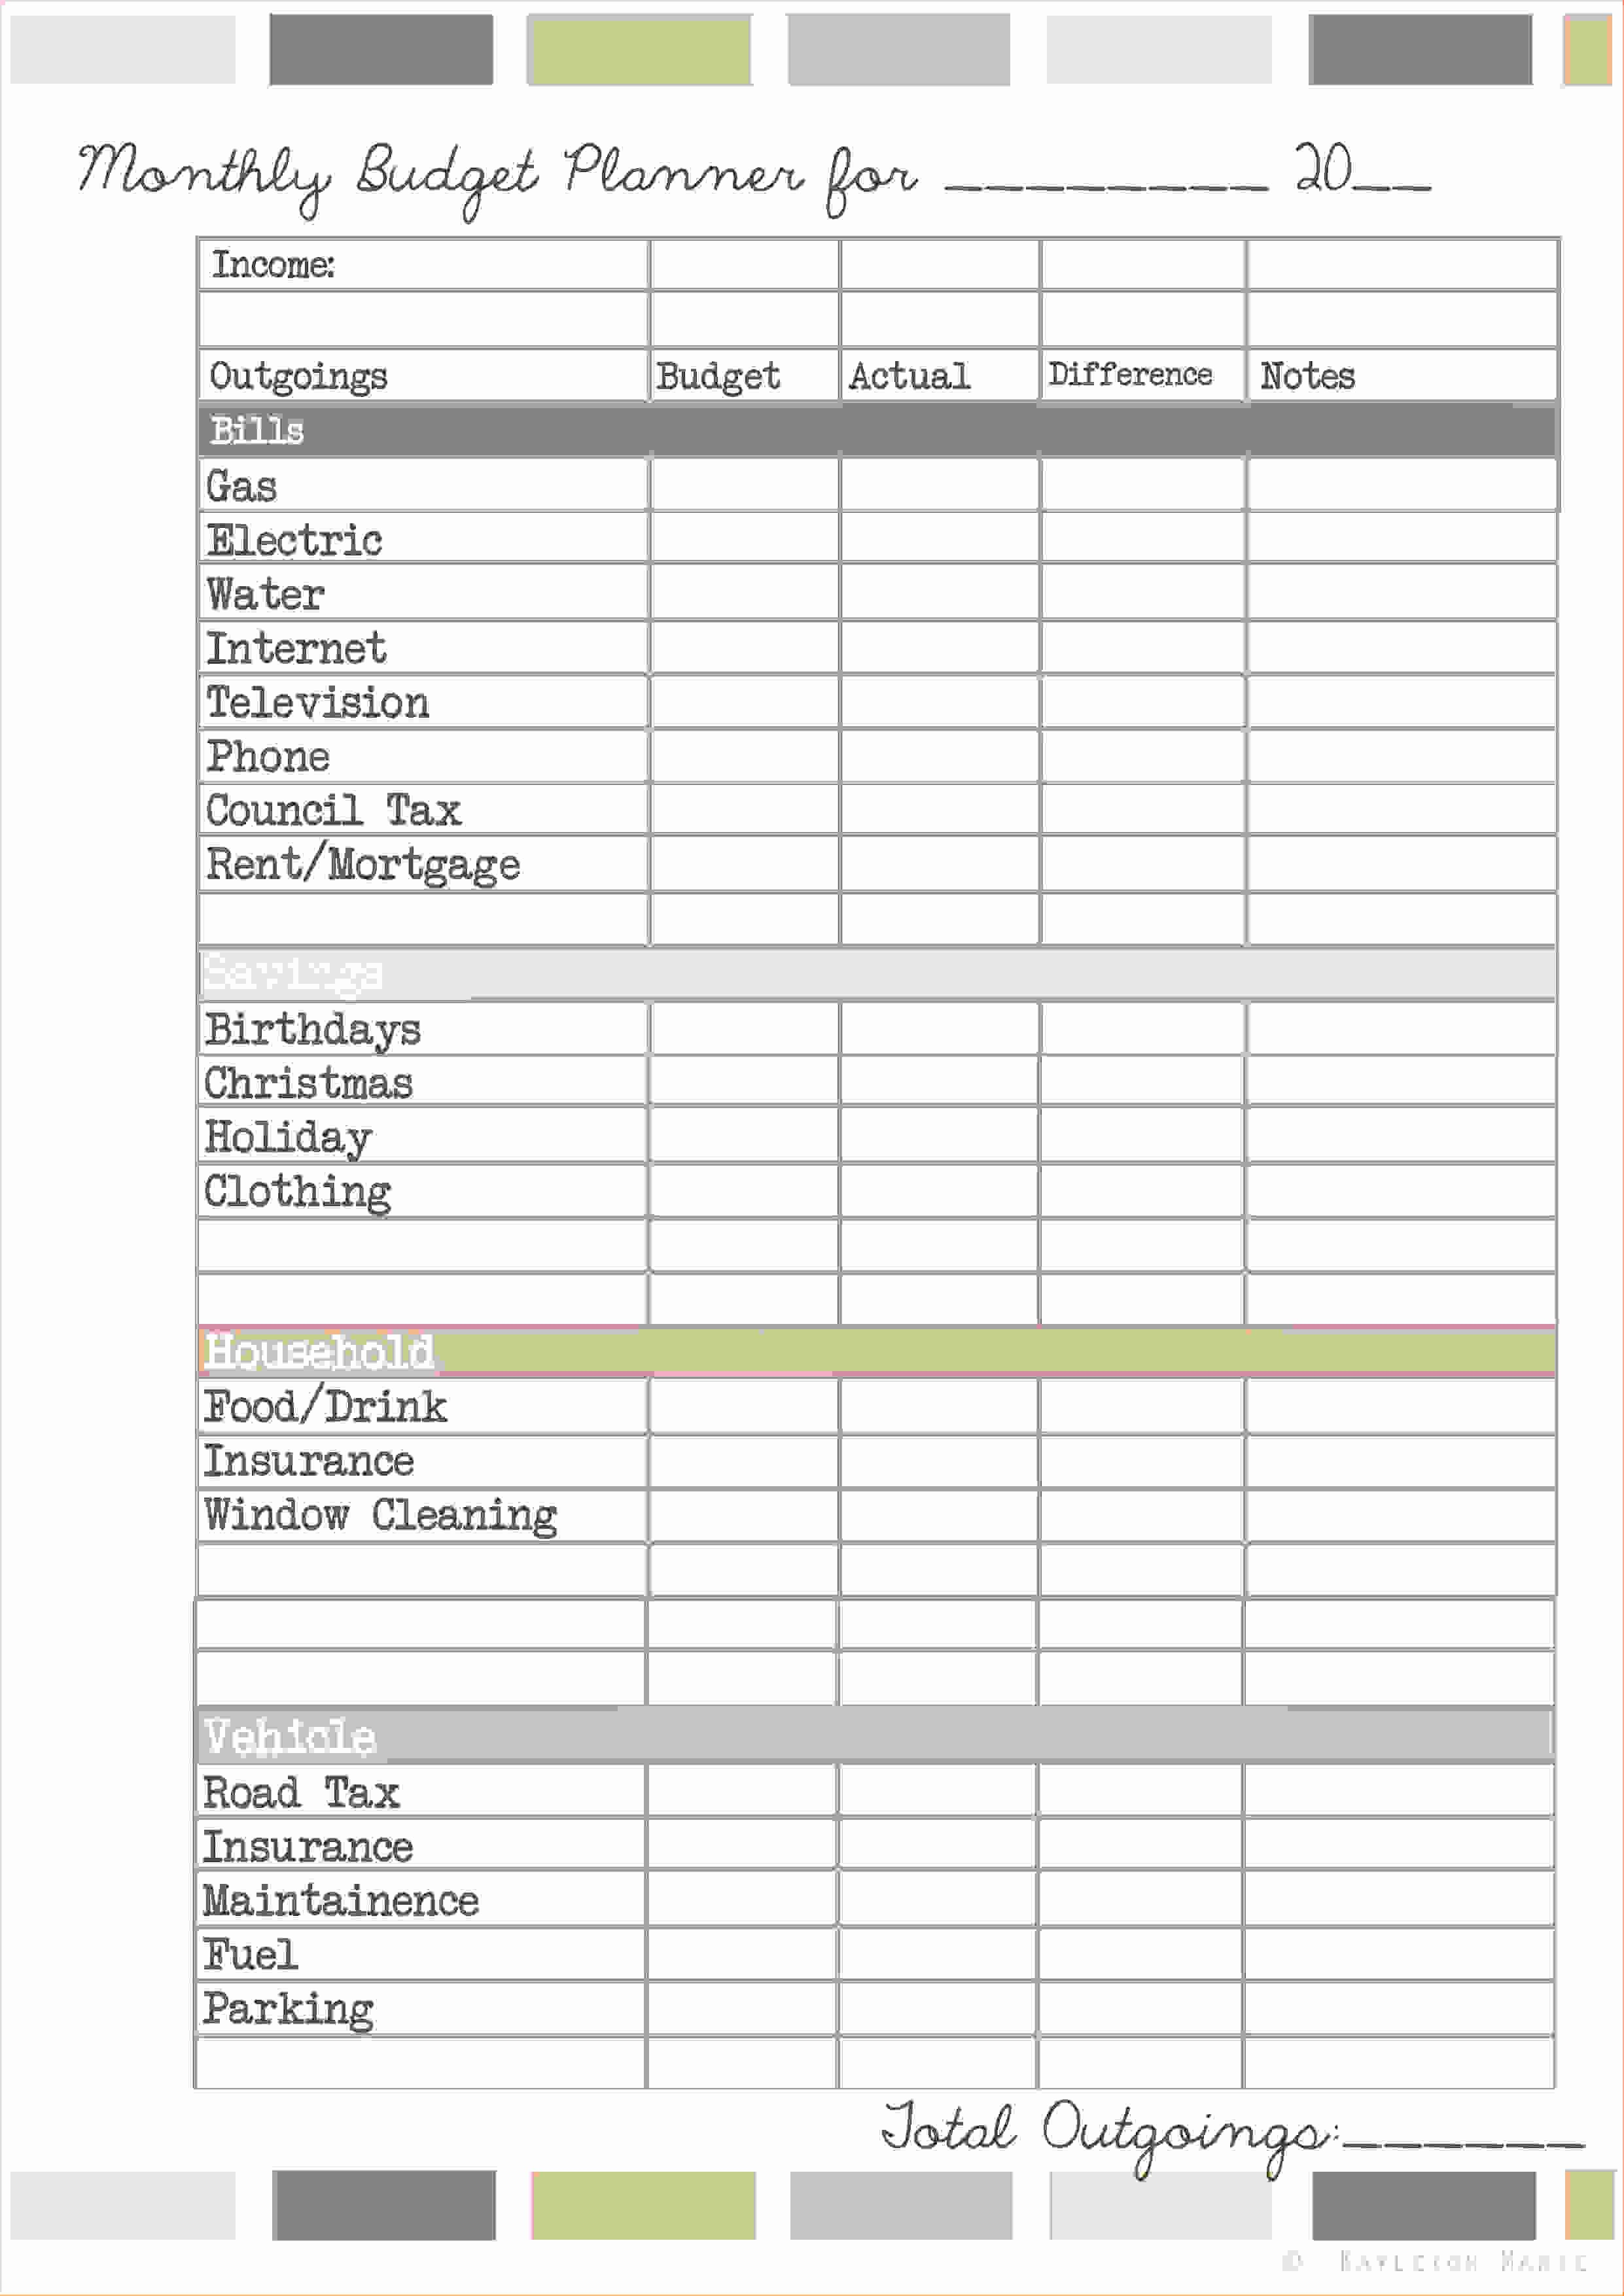 Sample Personal Monthly Budget Worksheet Simple Spreadsheet Template Or Sample Monthly Budget Worksheet